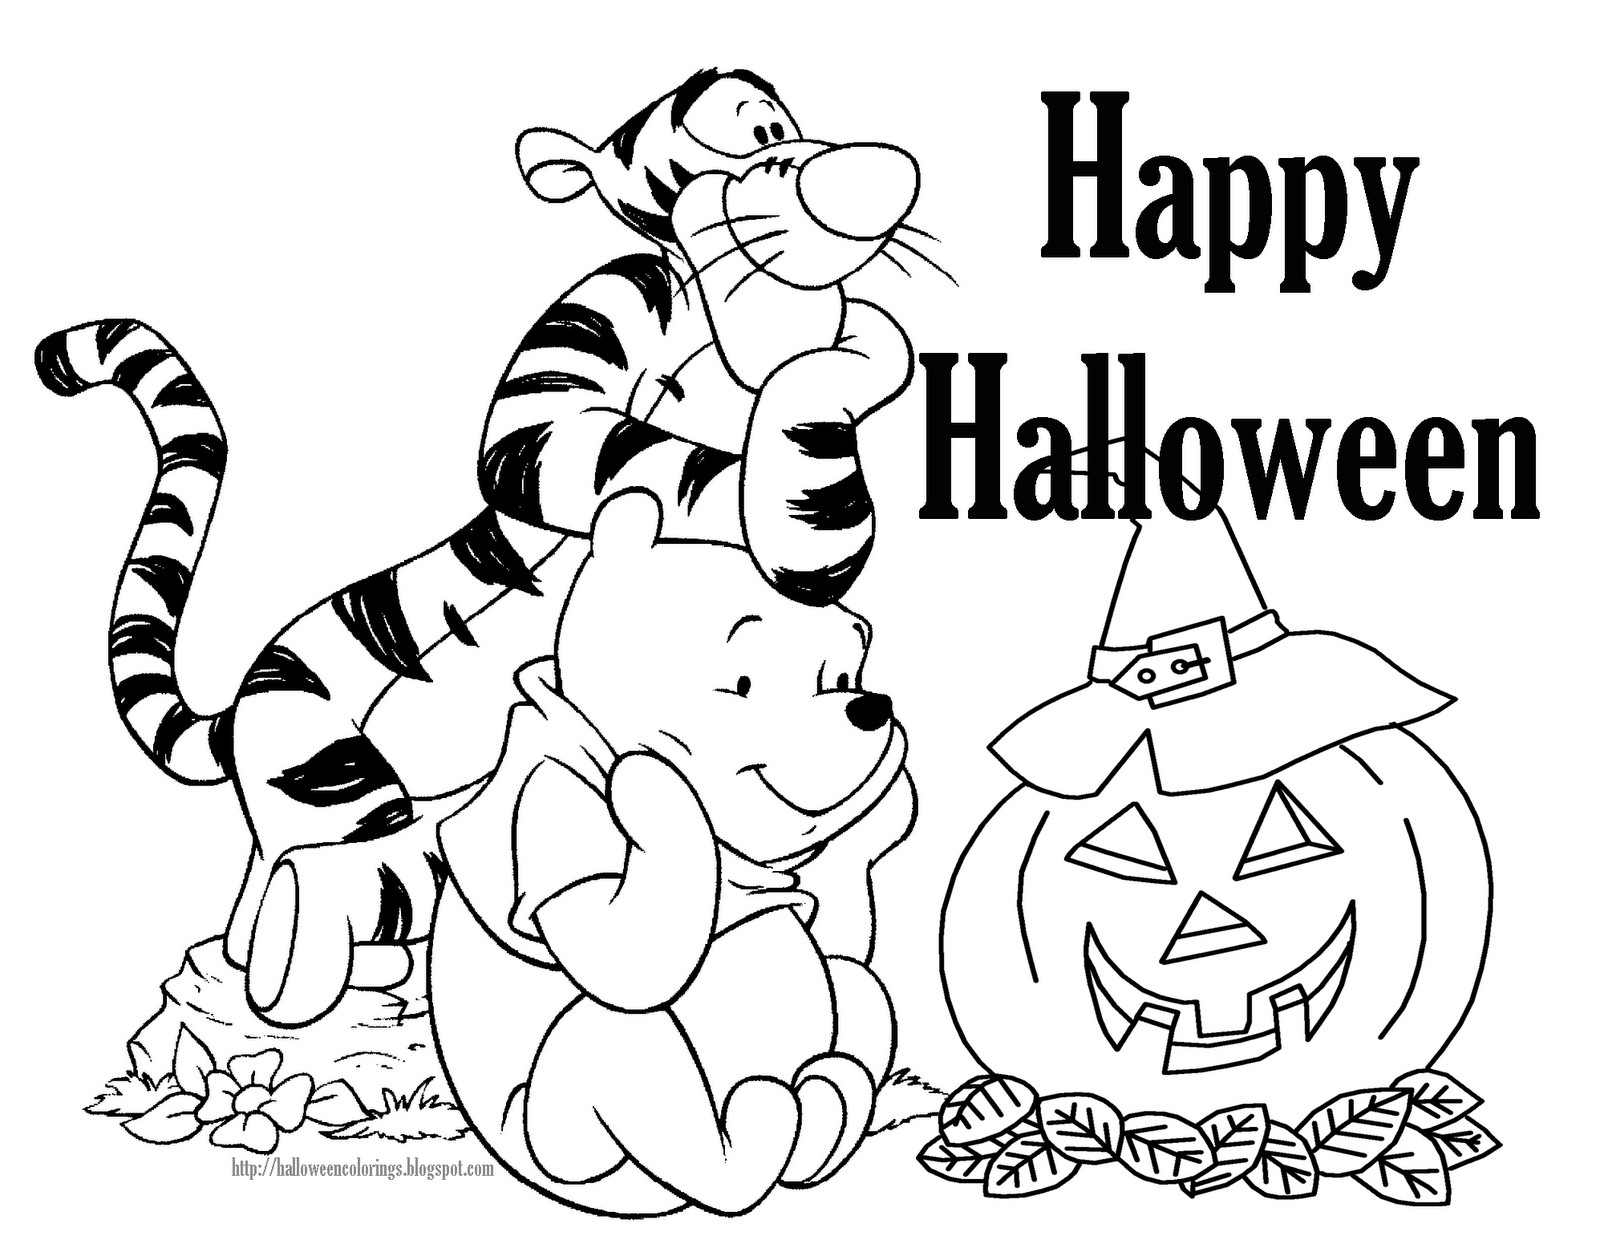 Animal Halloween Coloring Pages at GetColorings.com | Free printable